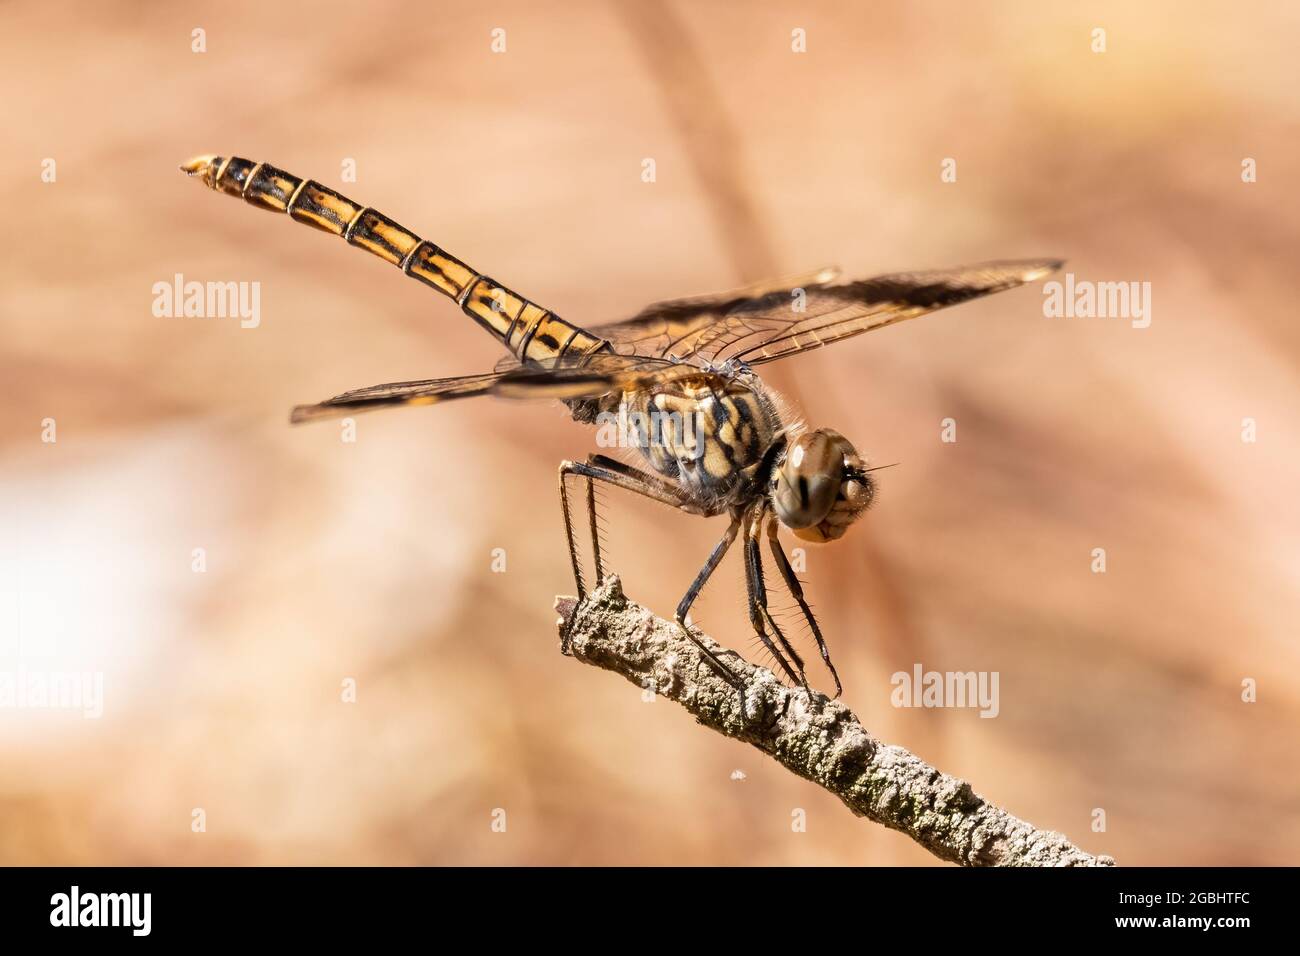 Brachythemis leucosticta or brachythemis impartita A brown striped dragonfly perched on top of a wooden pole Stock Photo